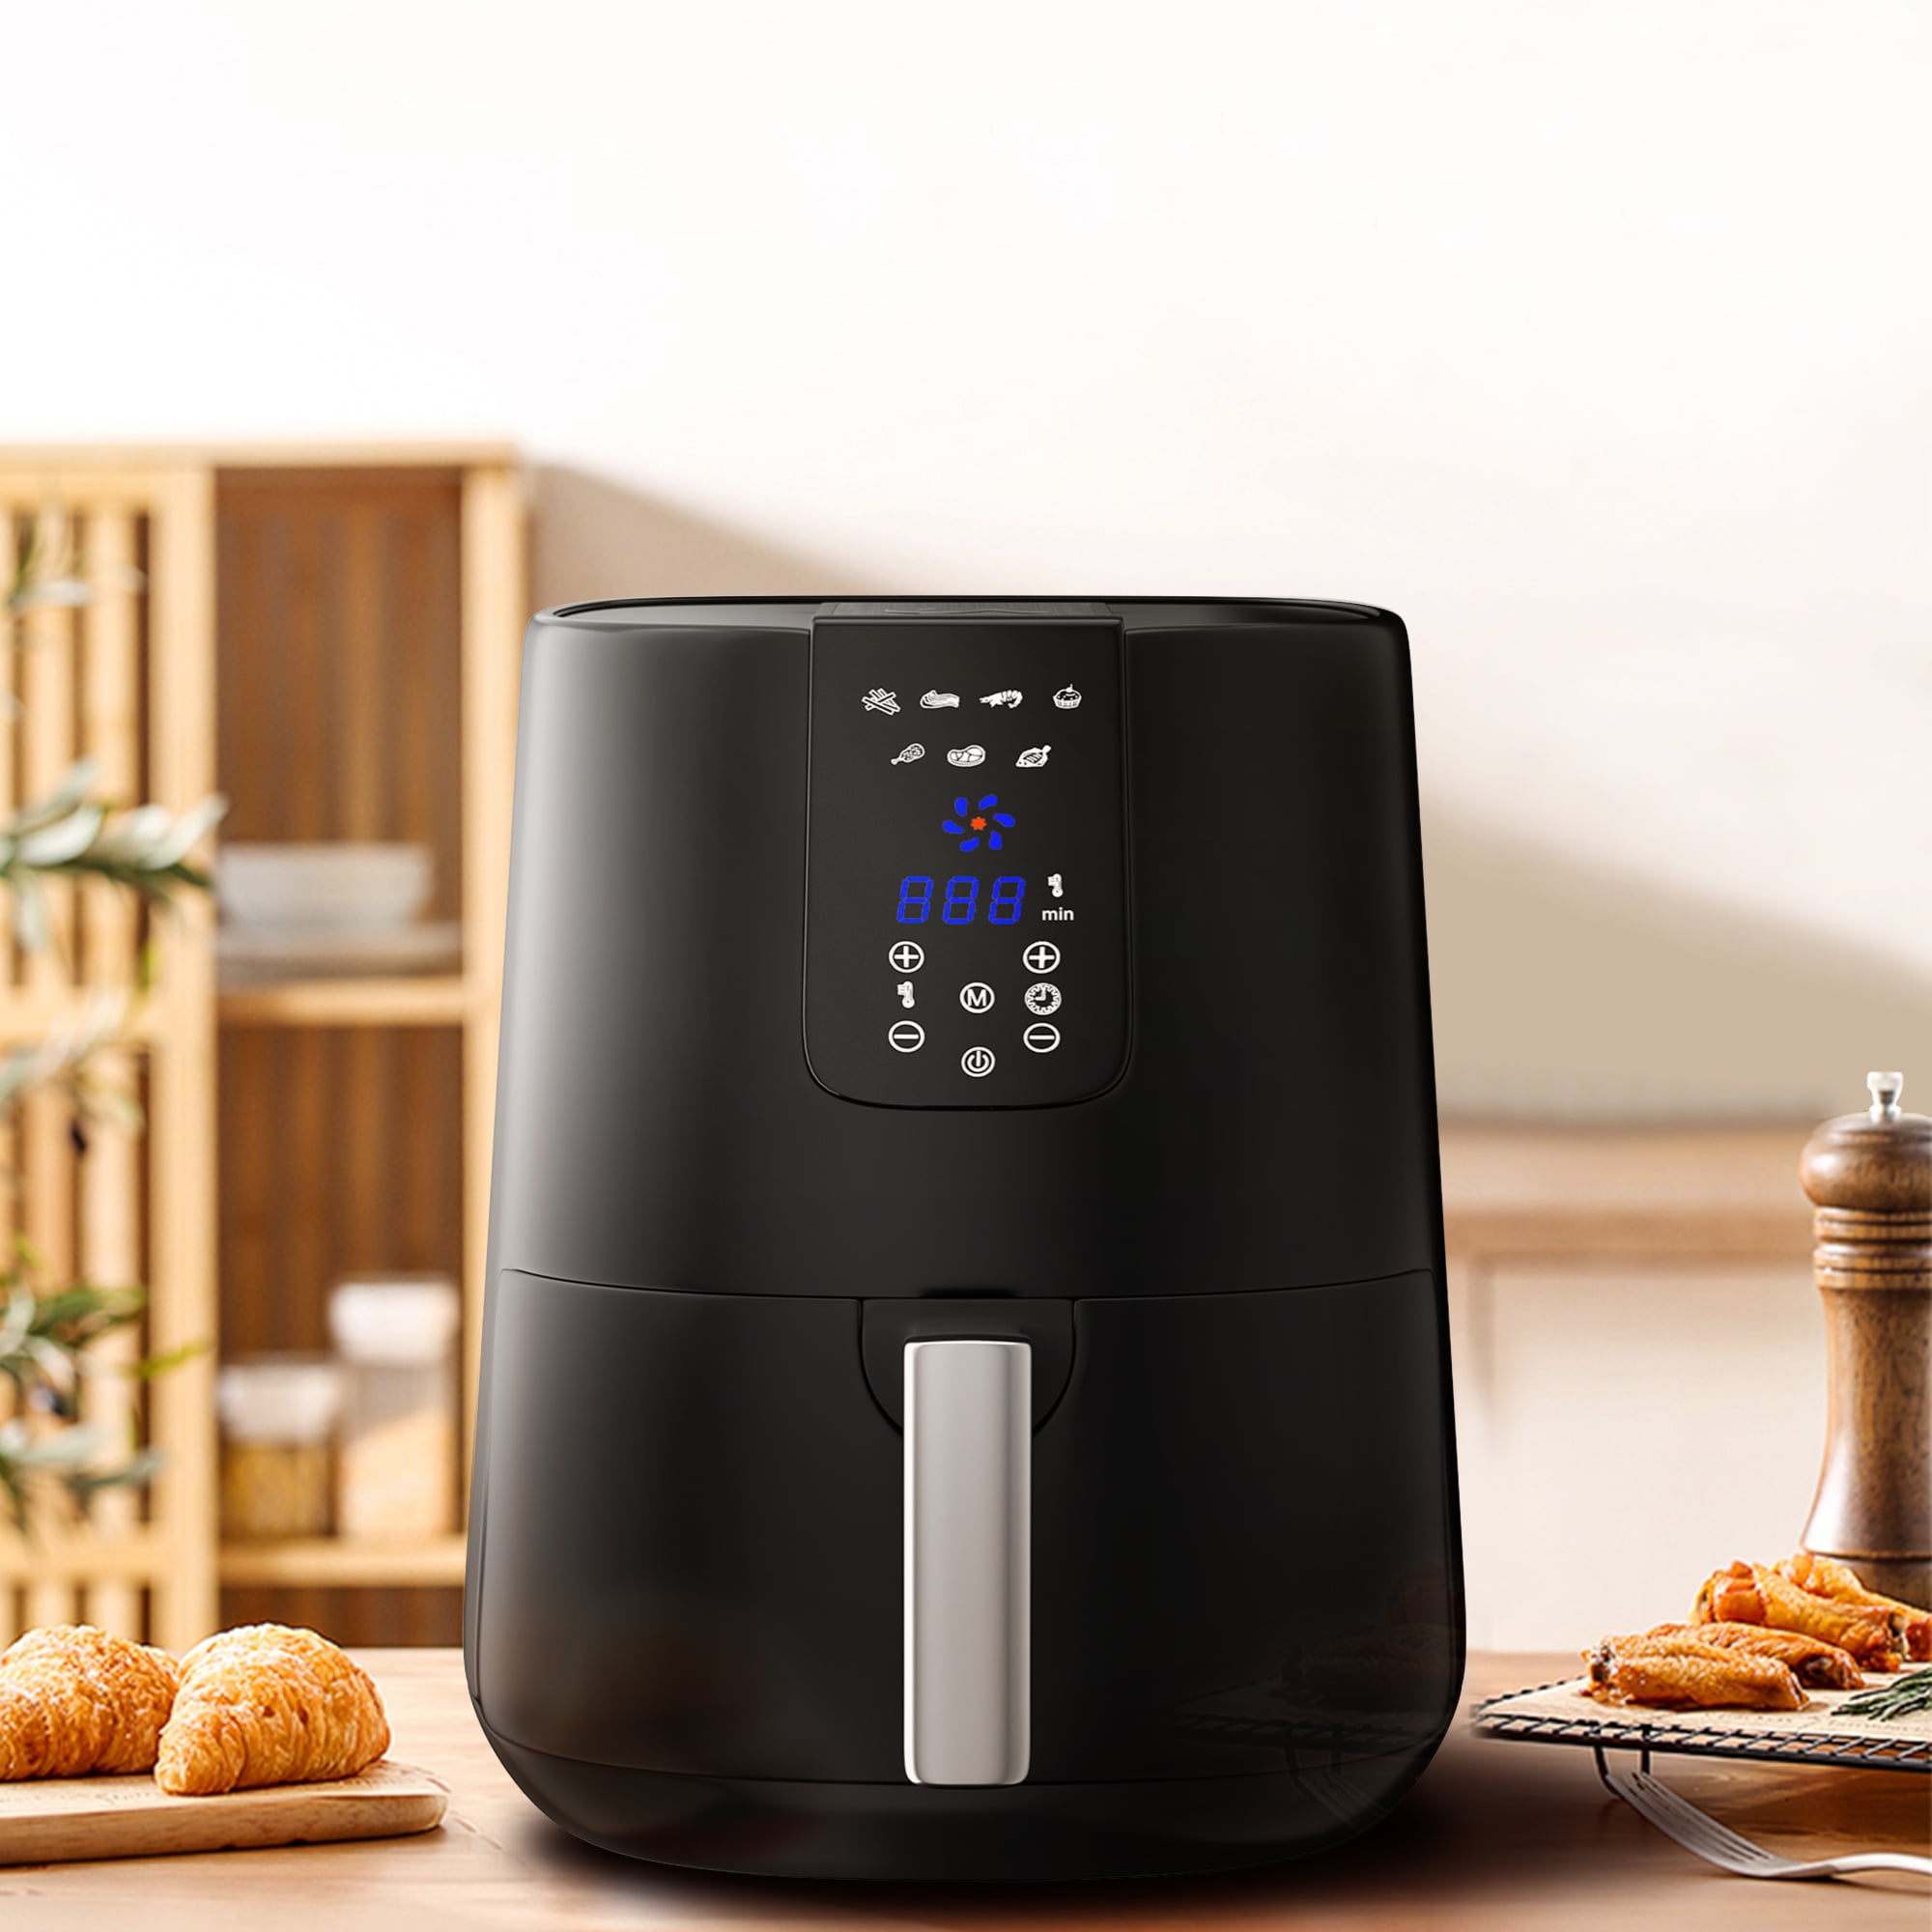 Uber Appliance Air Fryer XL Large 5 Qt Touch Display with 8 Pre-Set  Functions, 5 quart, Black, 5 Quart - Fry's Food Stores